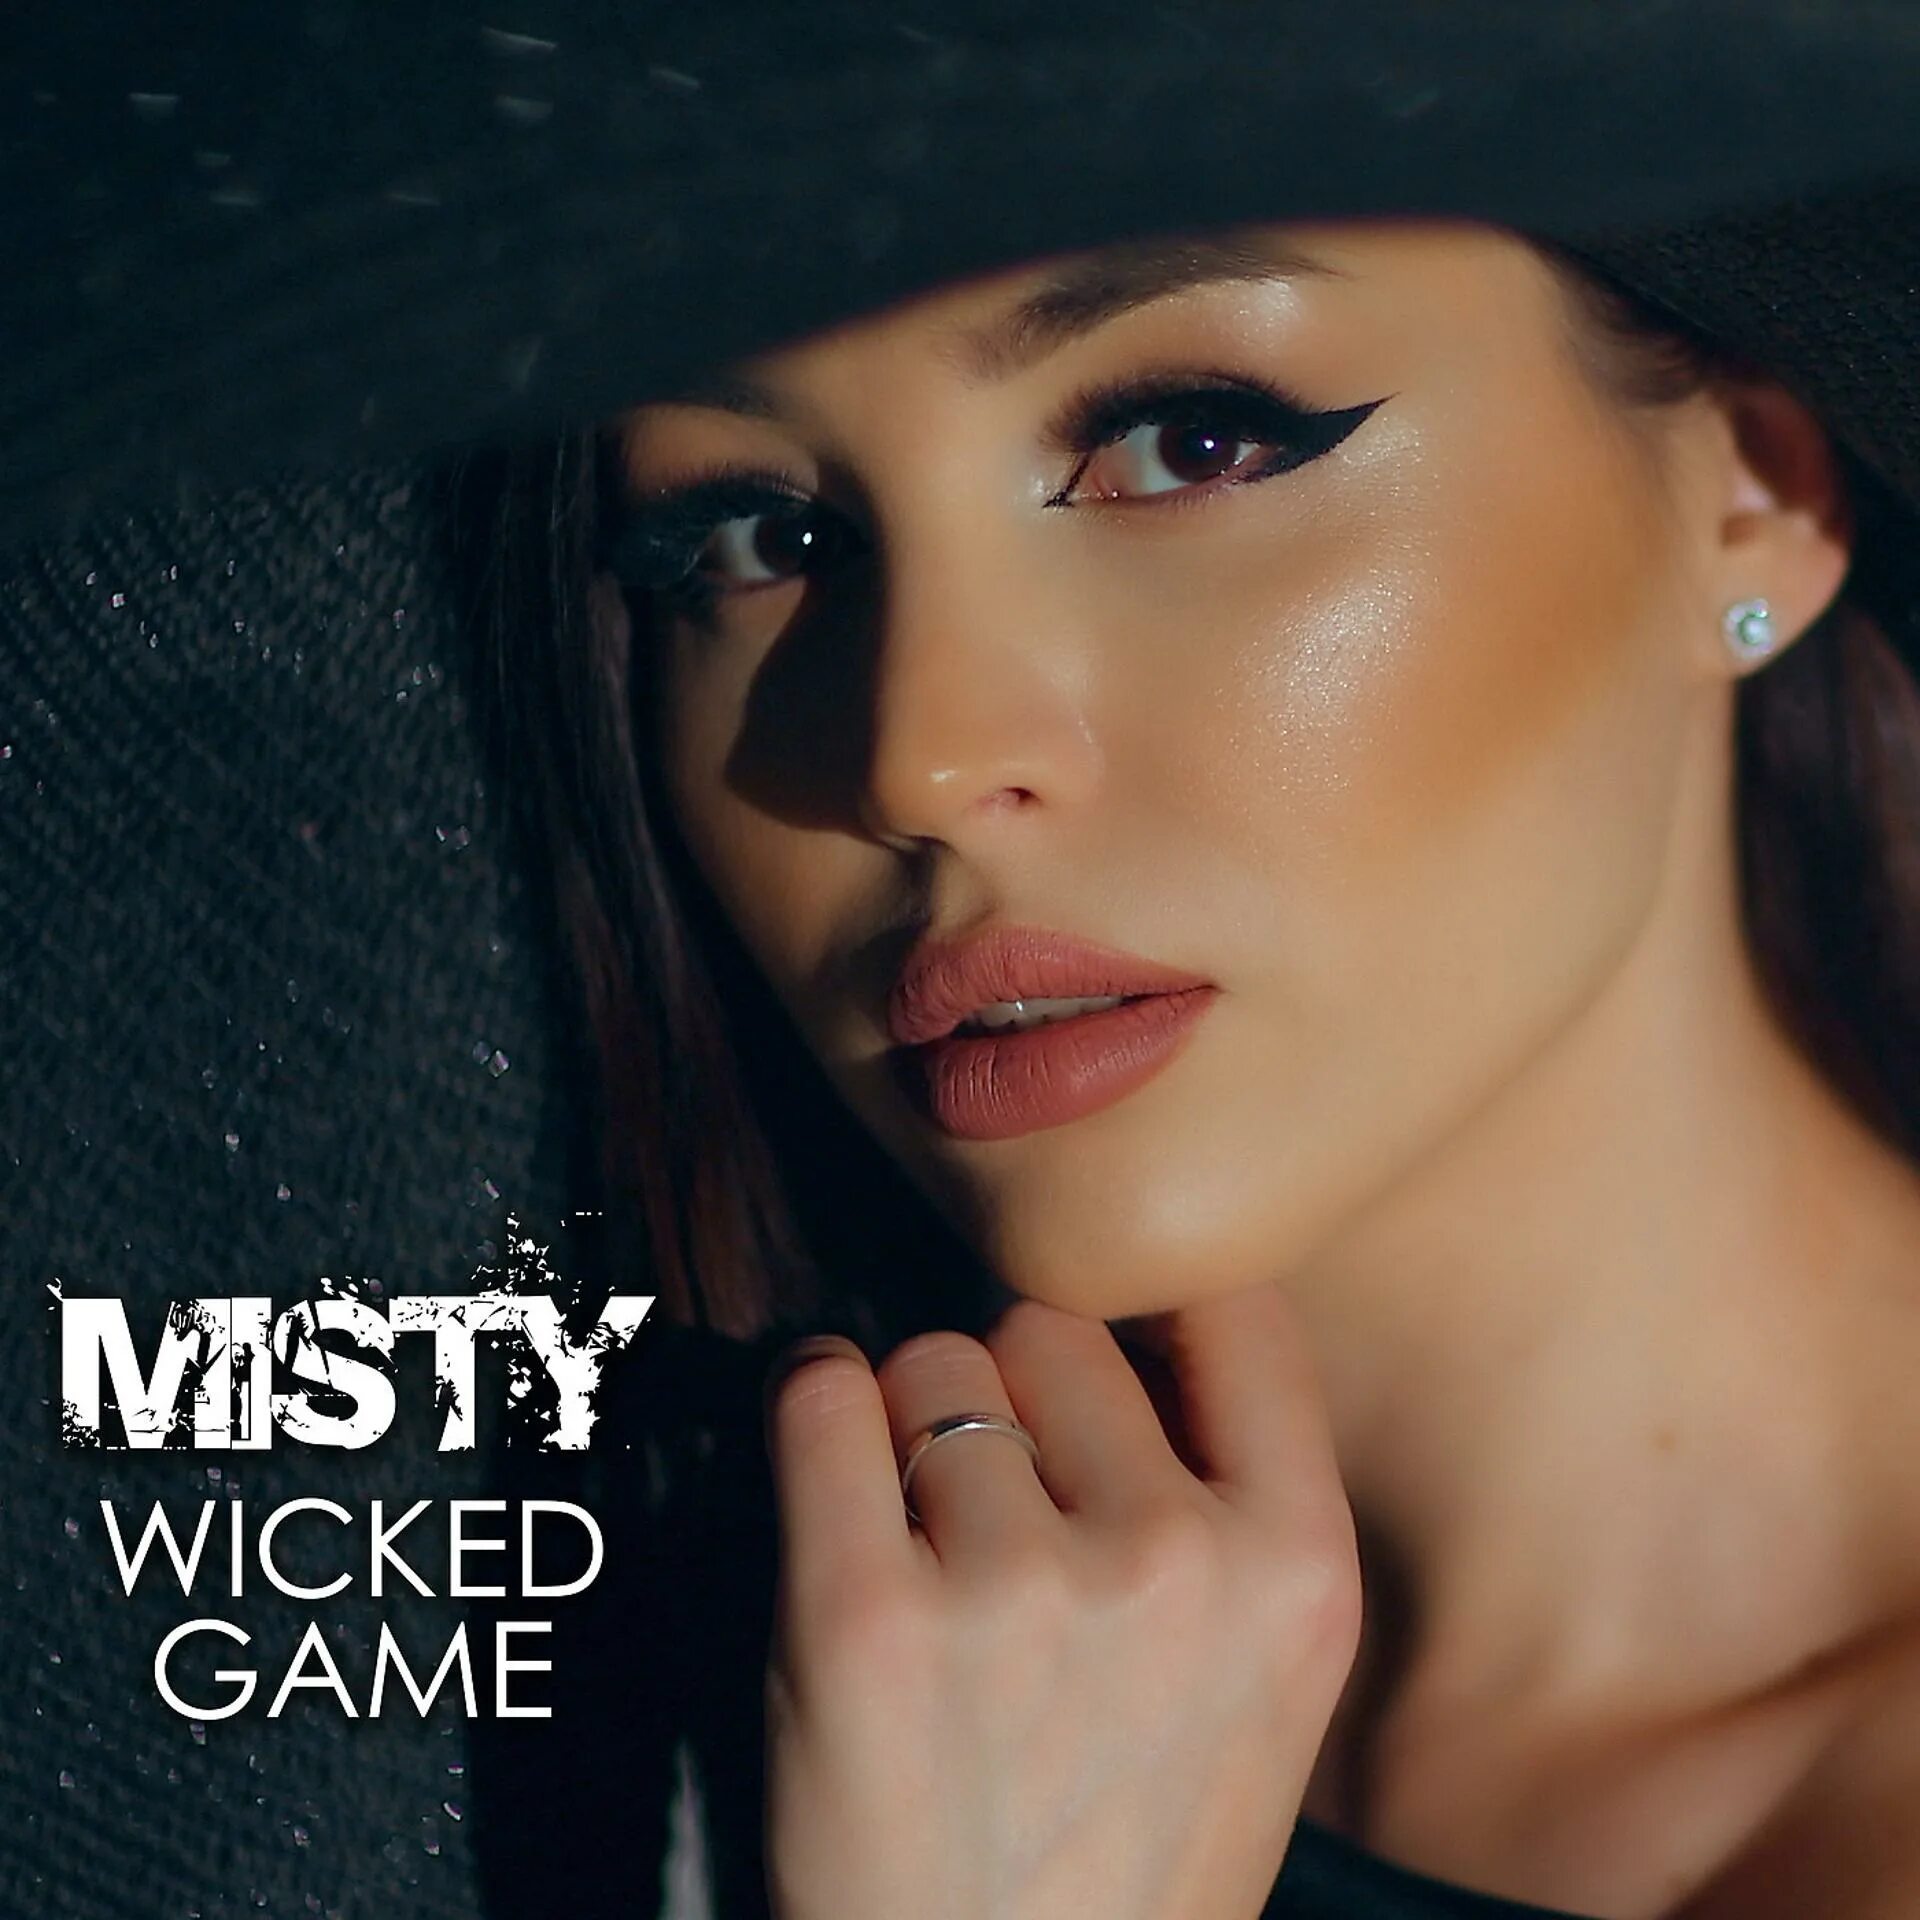 Wicked games feat. Wicked game. Misty & Deep Orient - Wicked game (Cover). Wicked game образ.